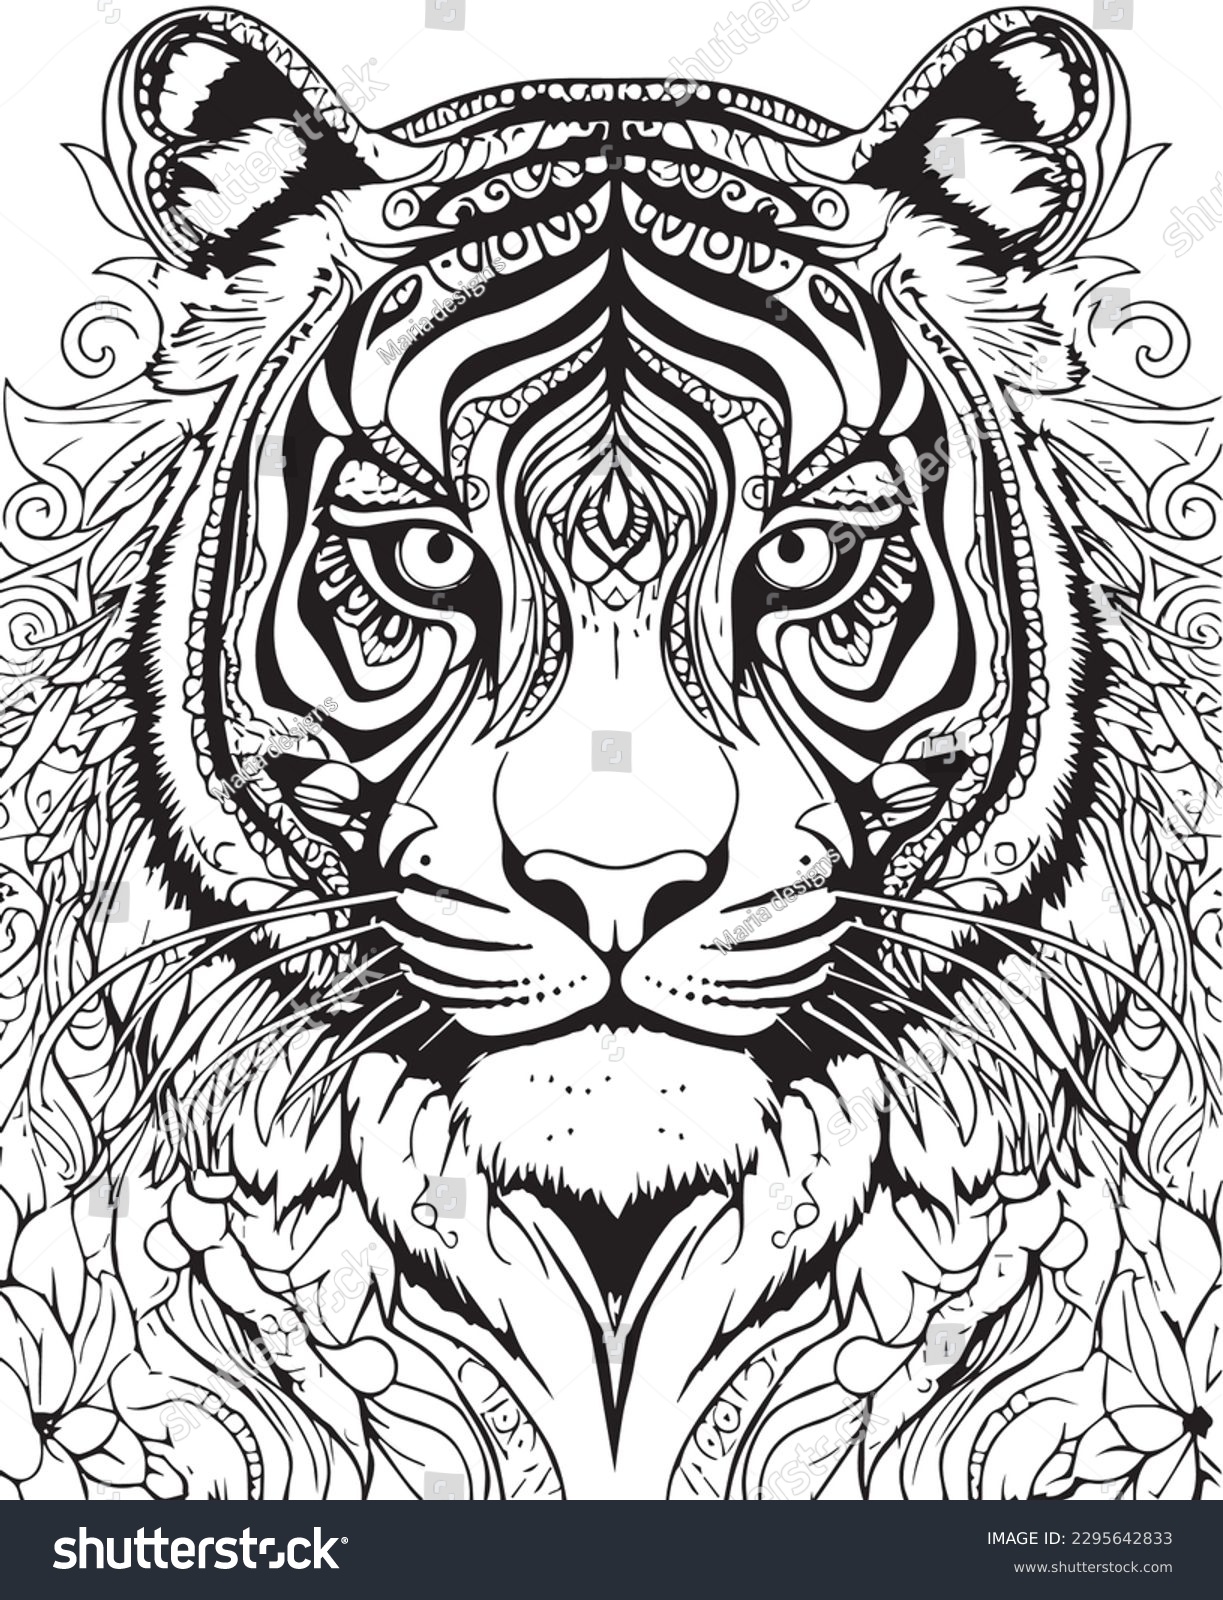 Thousand coloring page tiger royalty